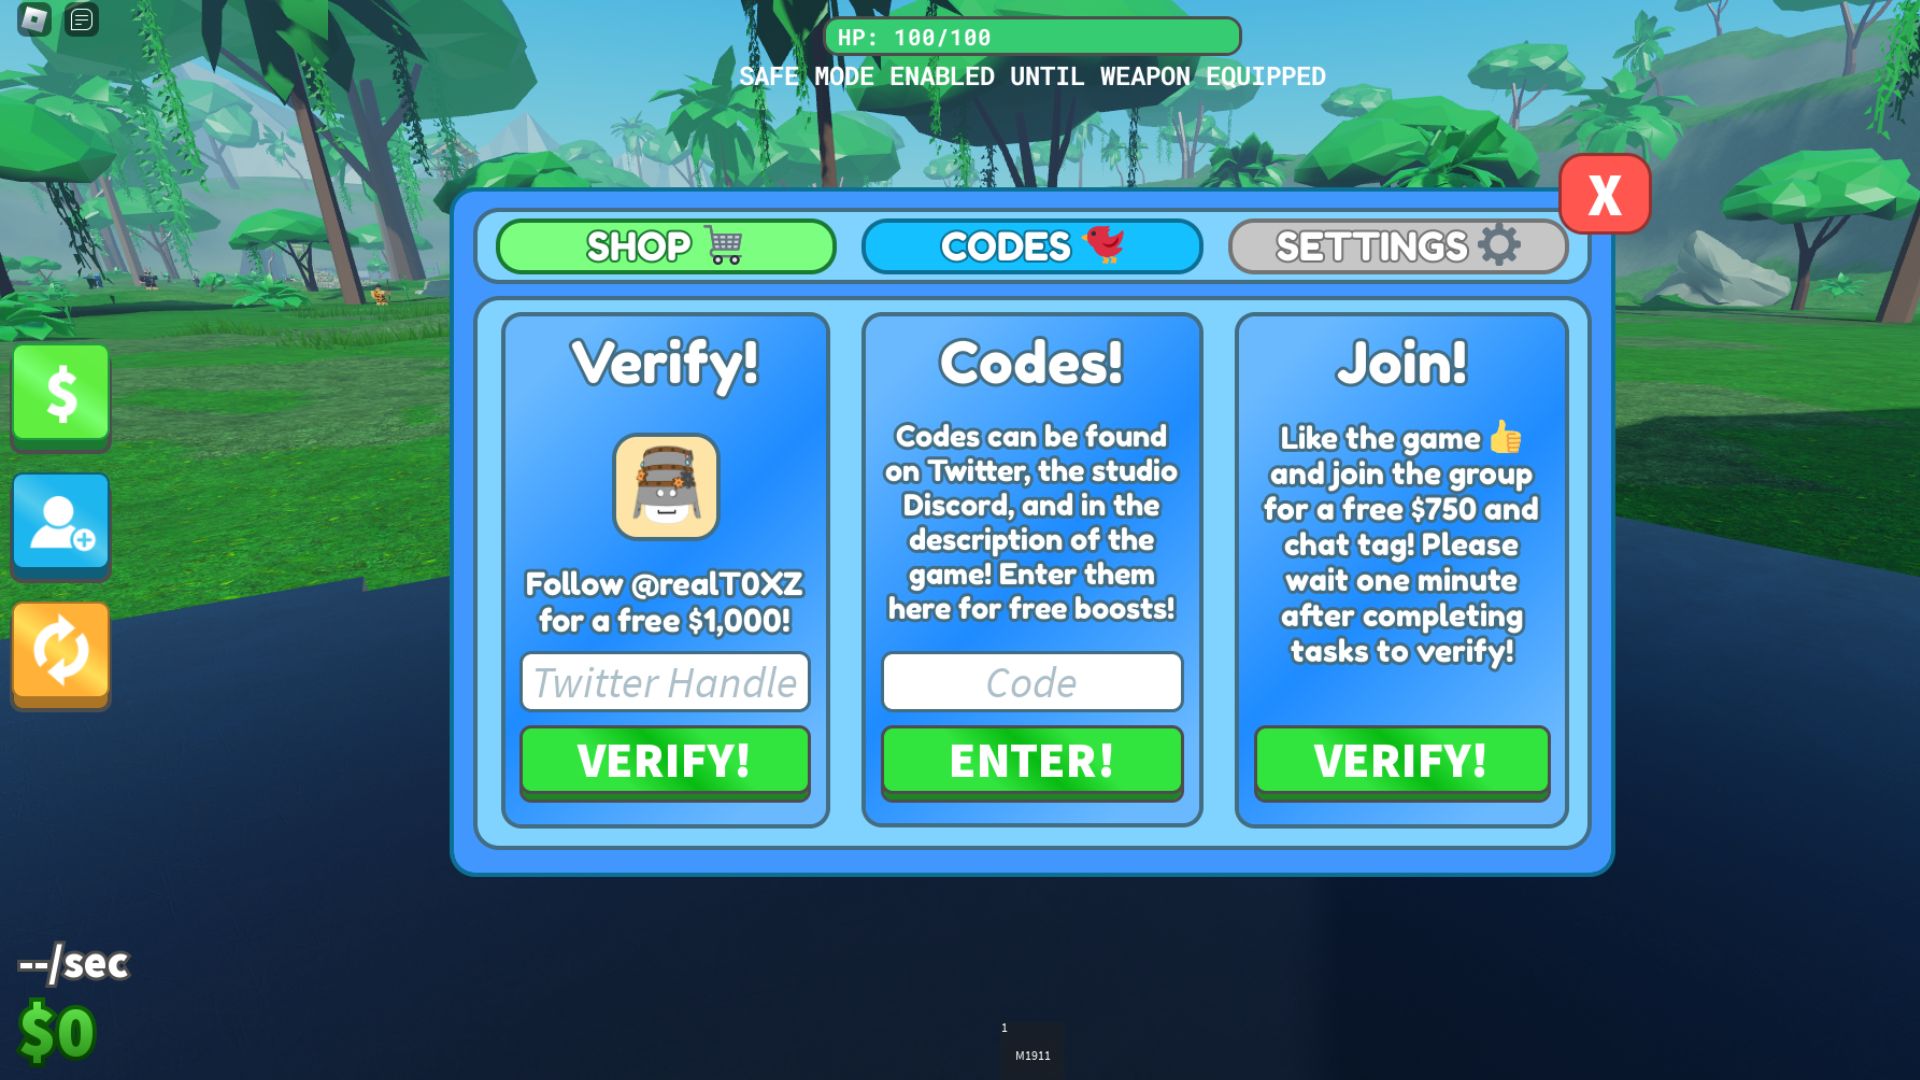 Roblox War Tycoon New Codes September 2023 